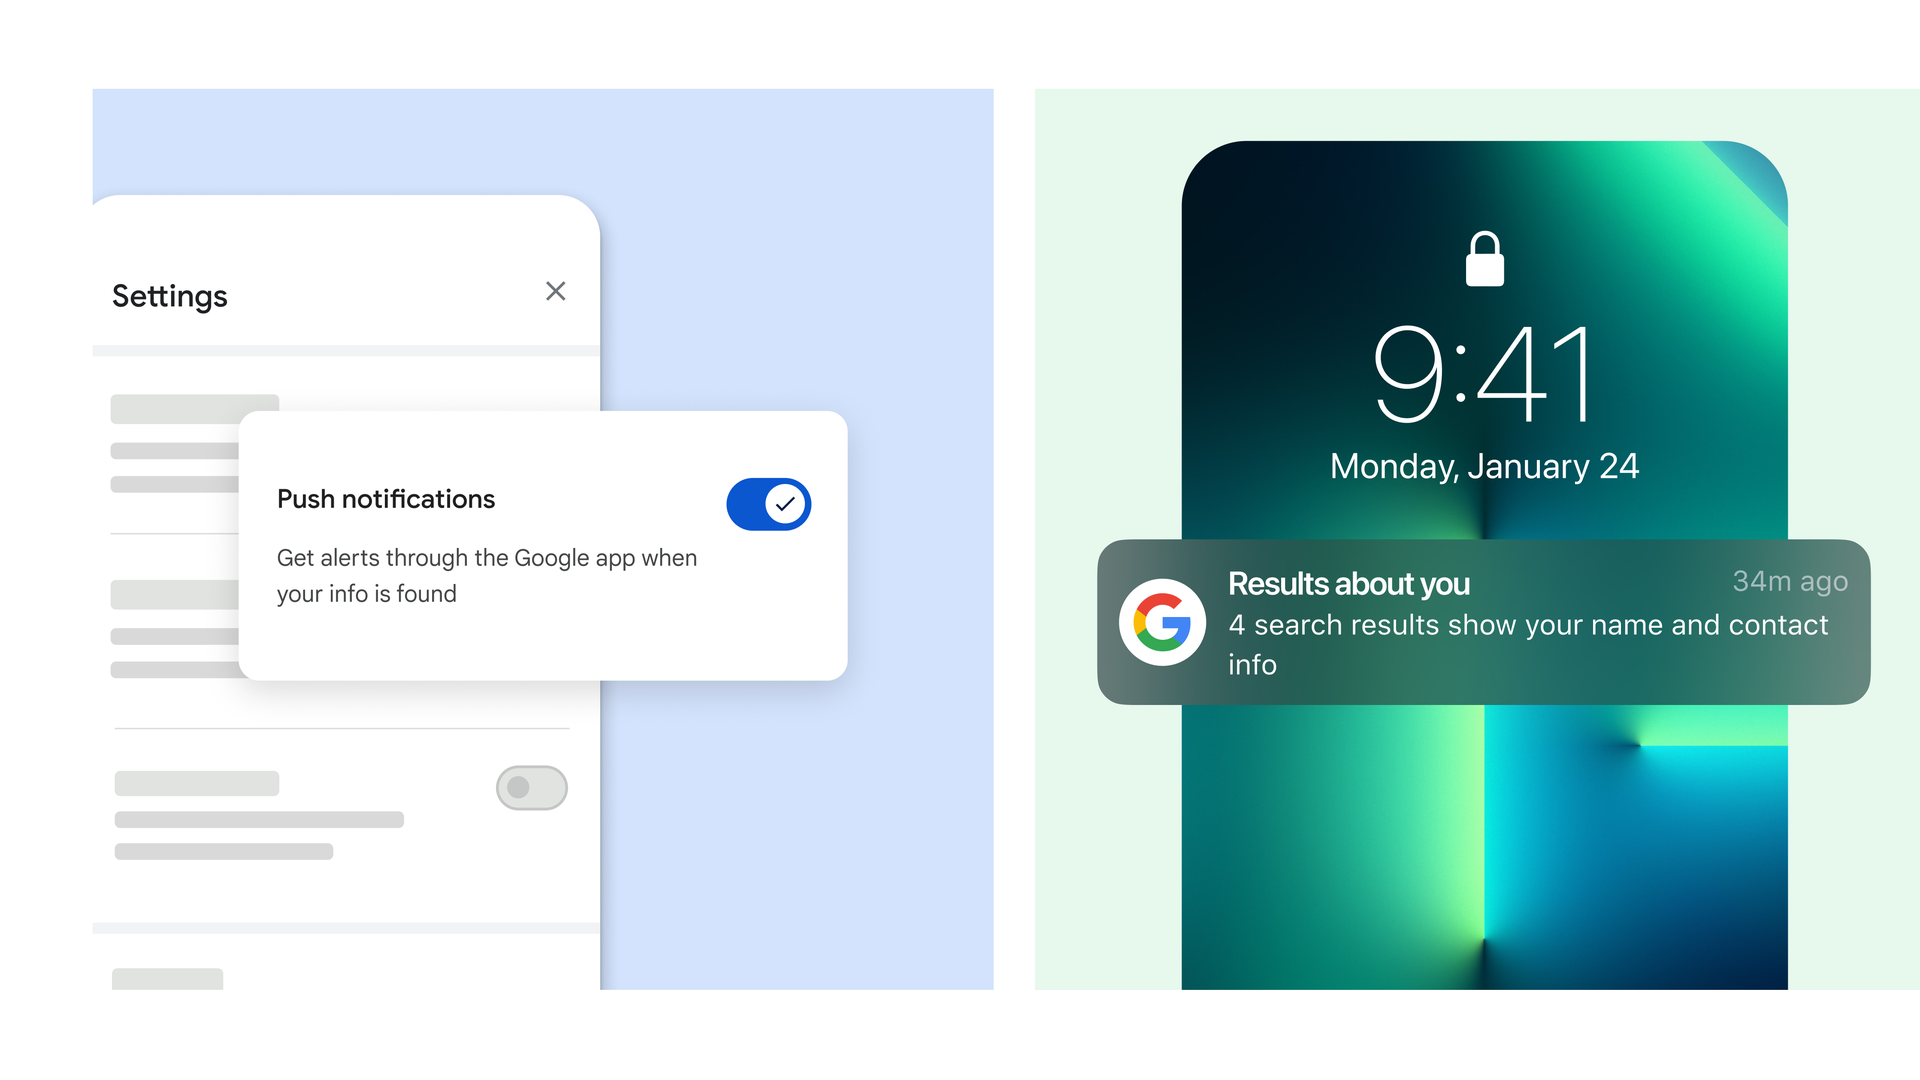 Sample notification from Google's new privacy and data controls 